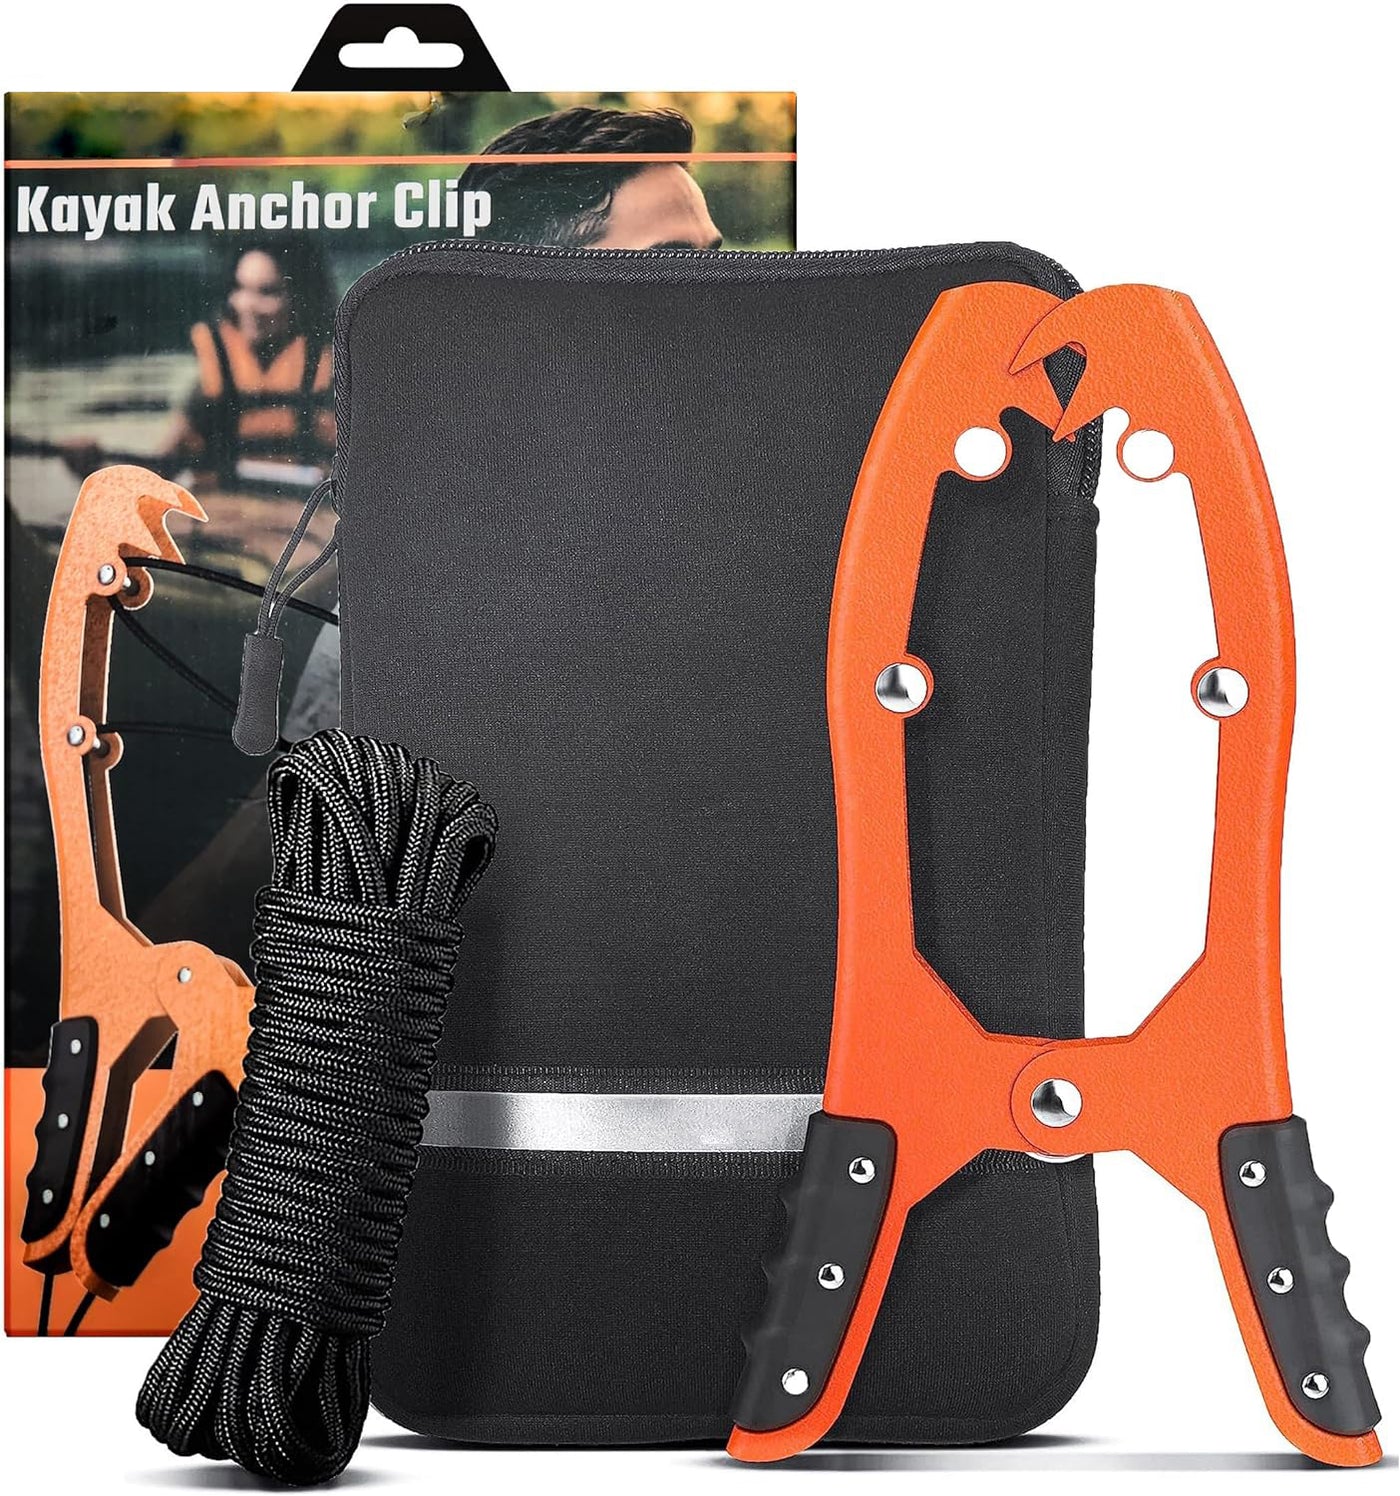 Original® BAX-JAW Kayak Anchor Clamp Grip - Wide 5.25" Self Locking Tension Jaw with Floating Pouch and 15' Paracord 550 Rope, Kayaking Accessories (Corrosion-Proof Steel)